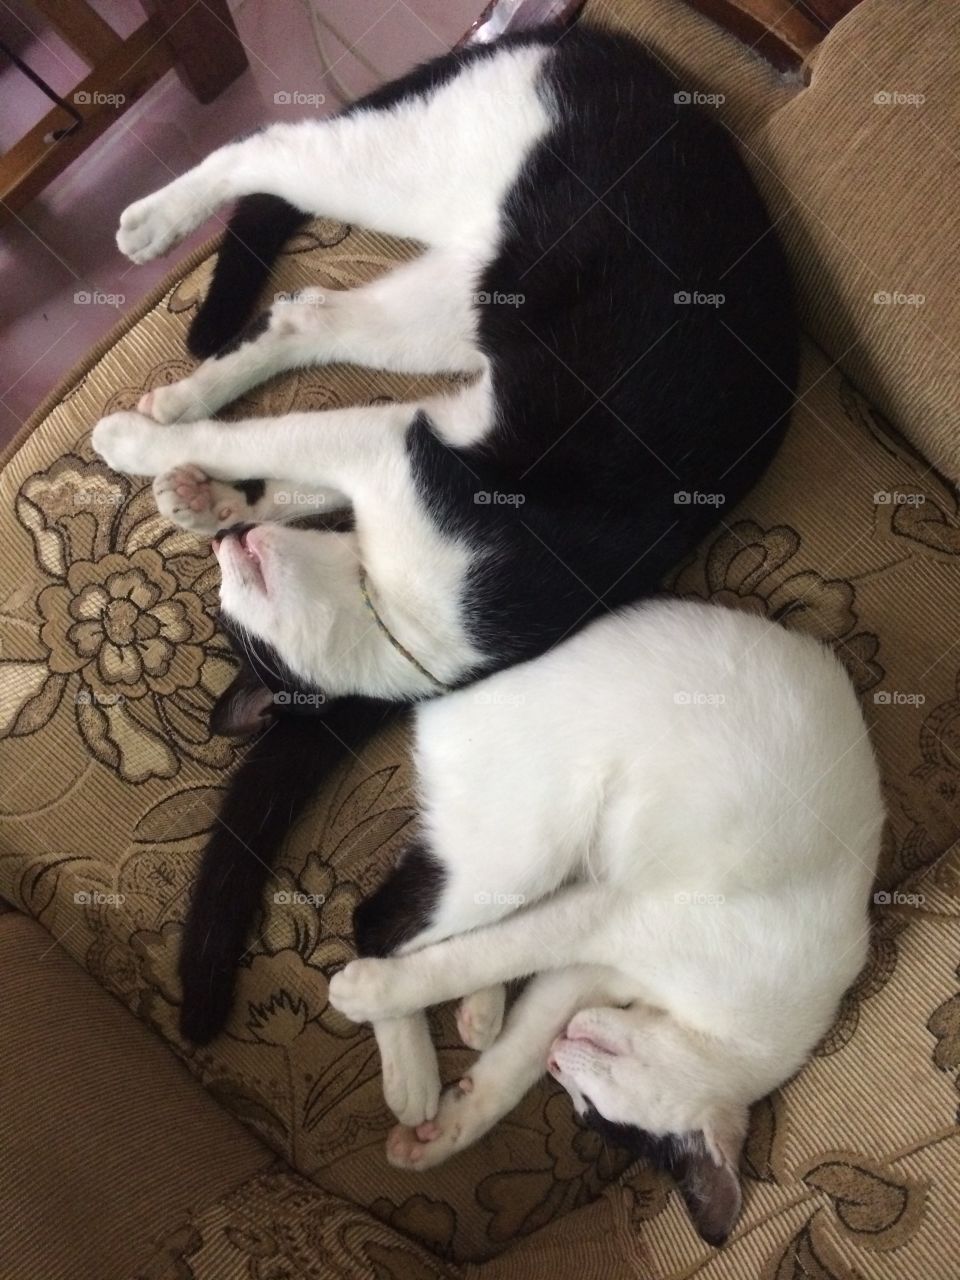 Two cat was sleepy at chair. Black and white color